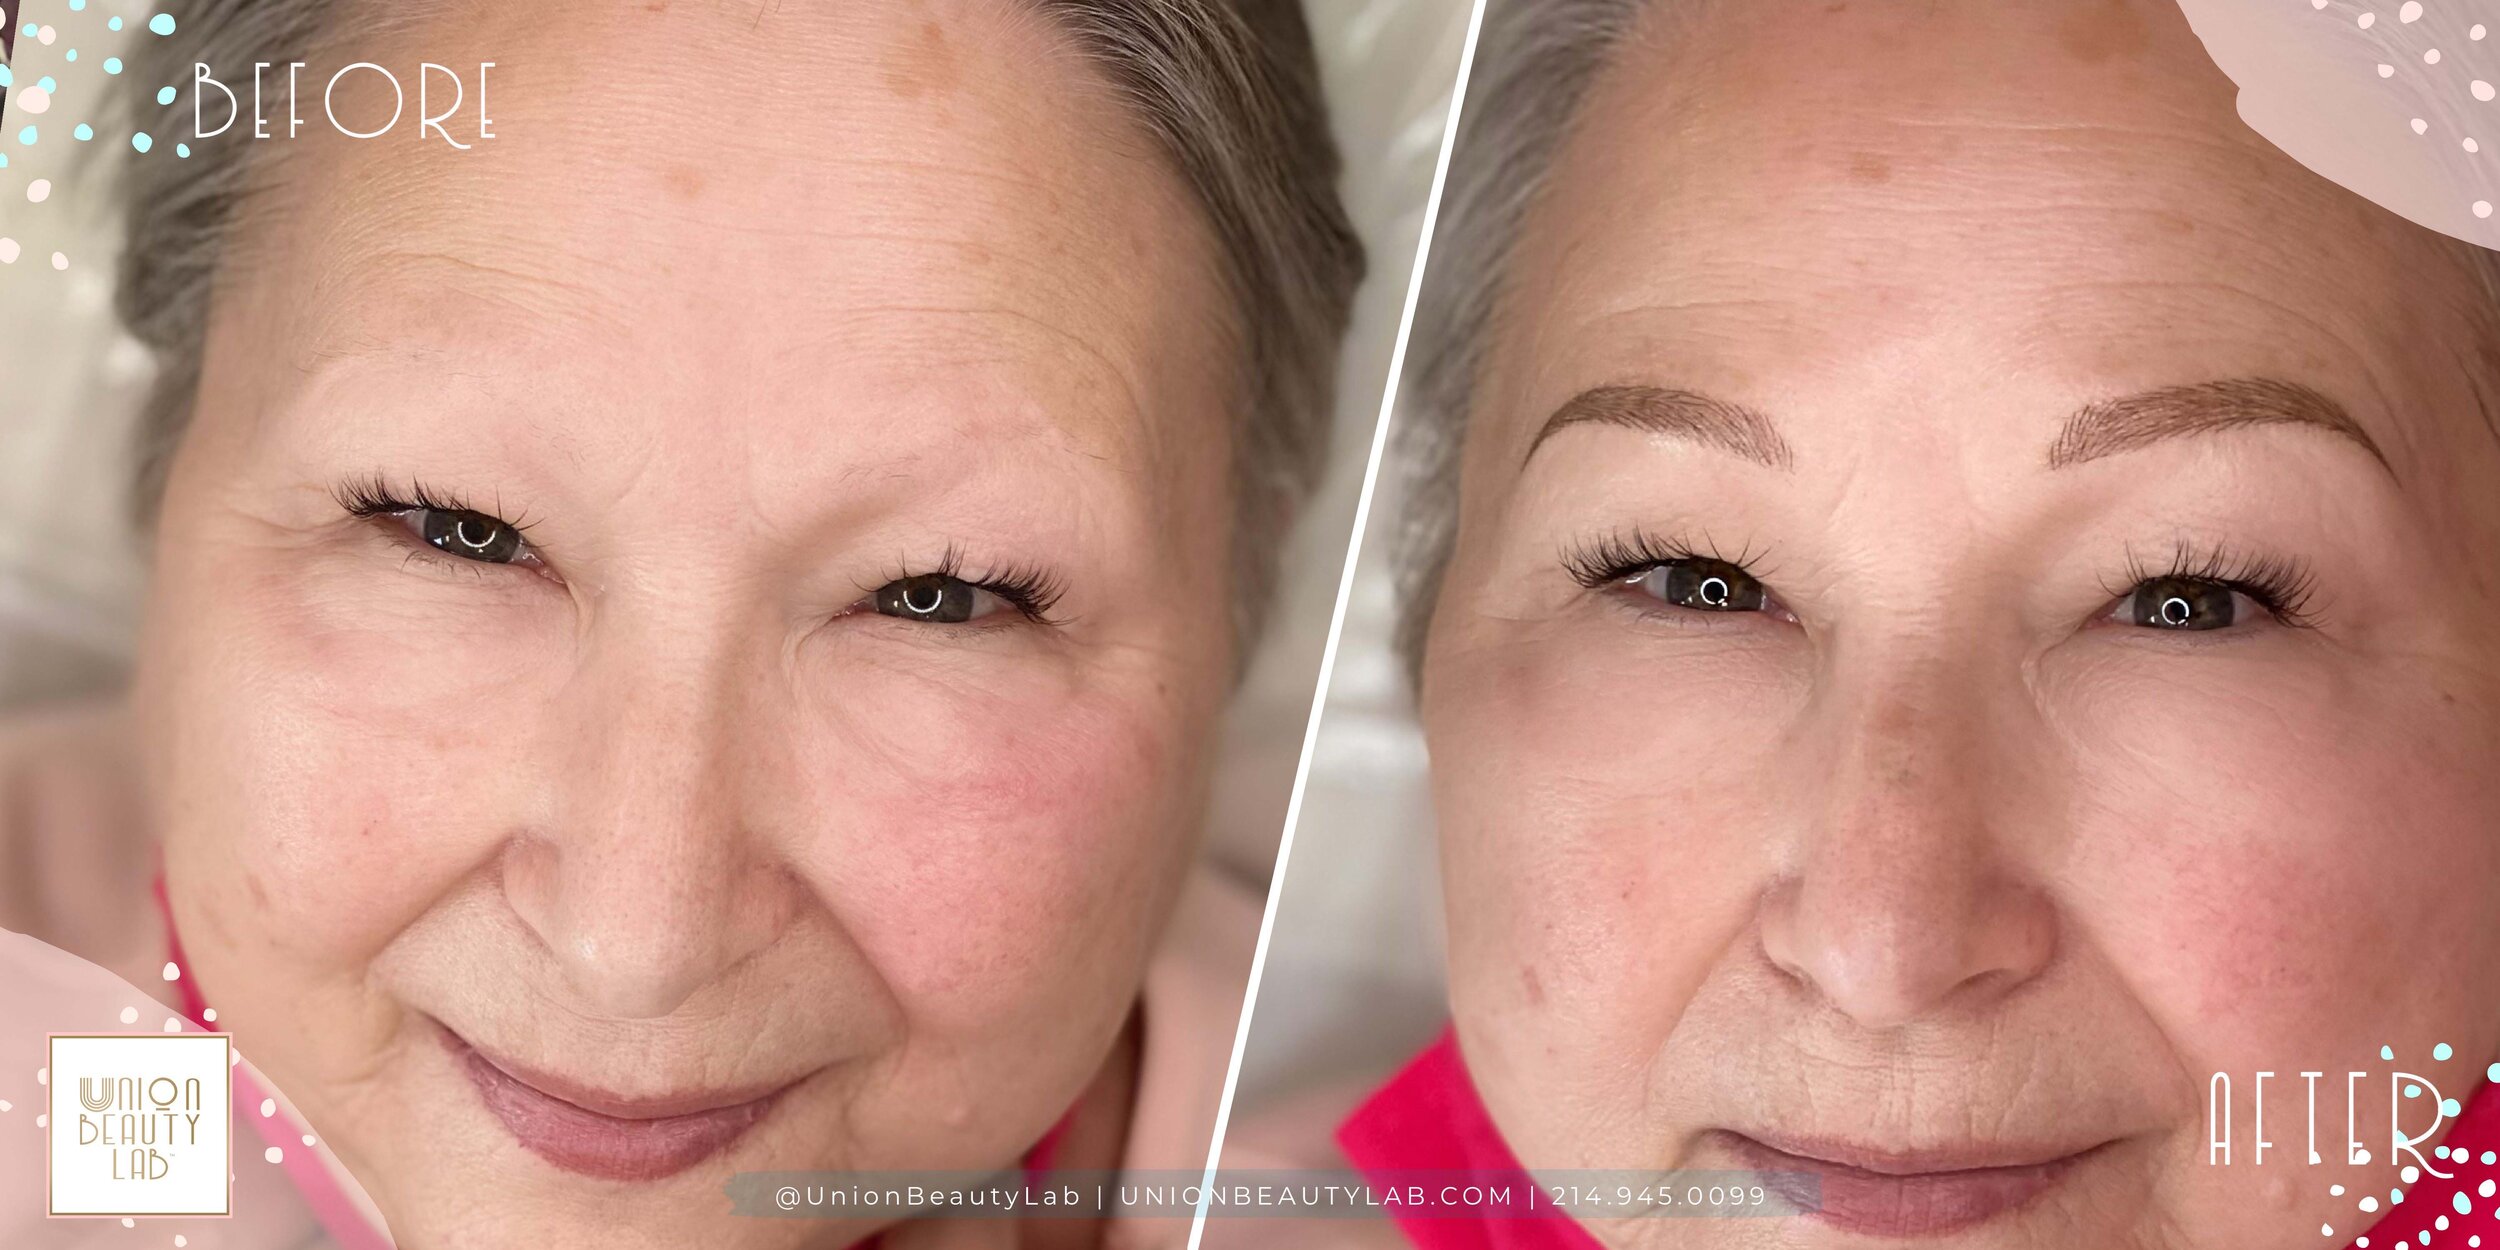 2149450099 Union Beauty Lab Advanced Microblading and Cosmetic Tattooing Dallas Blonde Mature Brows 31 Microblading.jpg